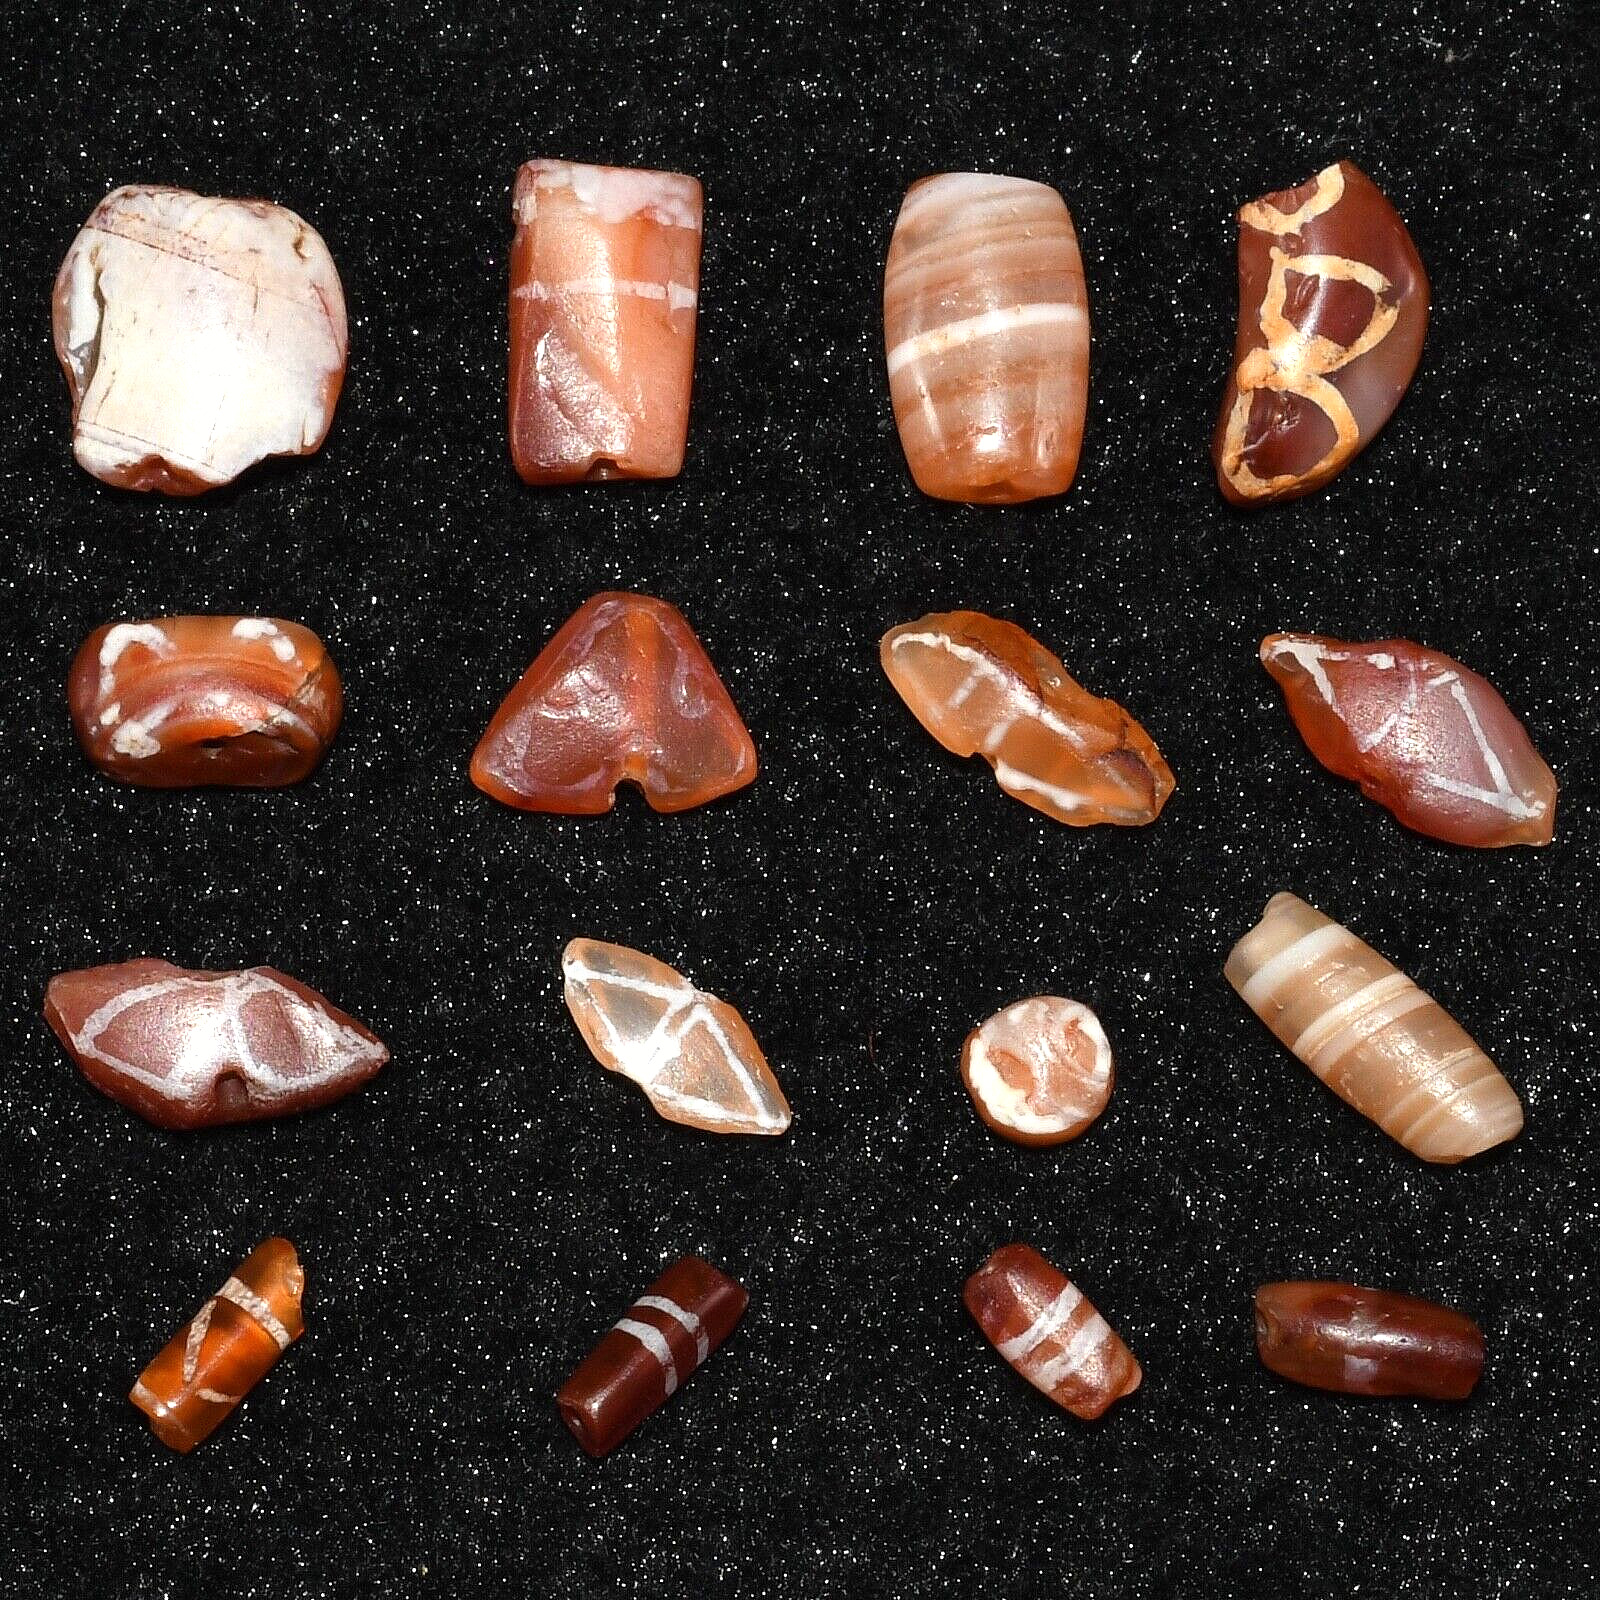 16 Genuine Ancient Etched Carnelian Beads in Good Condition Over 2000 Years Old